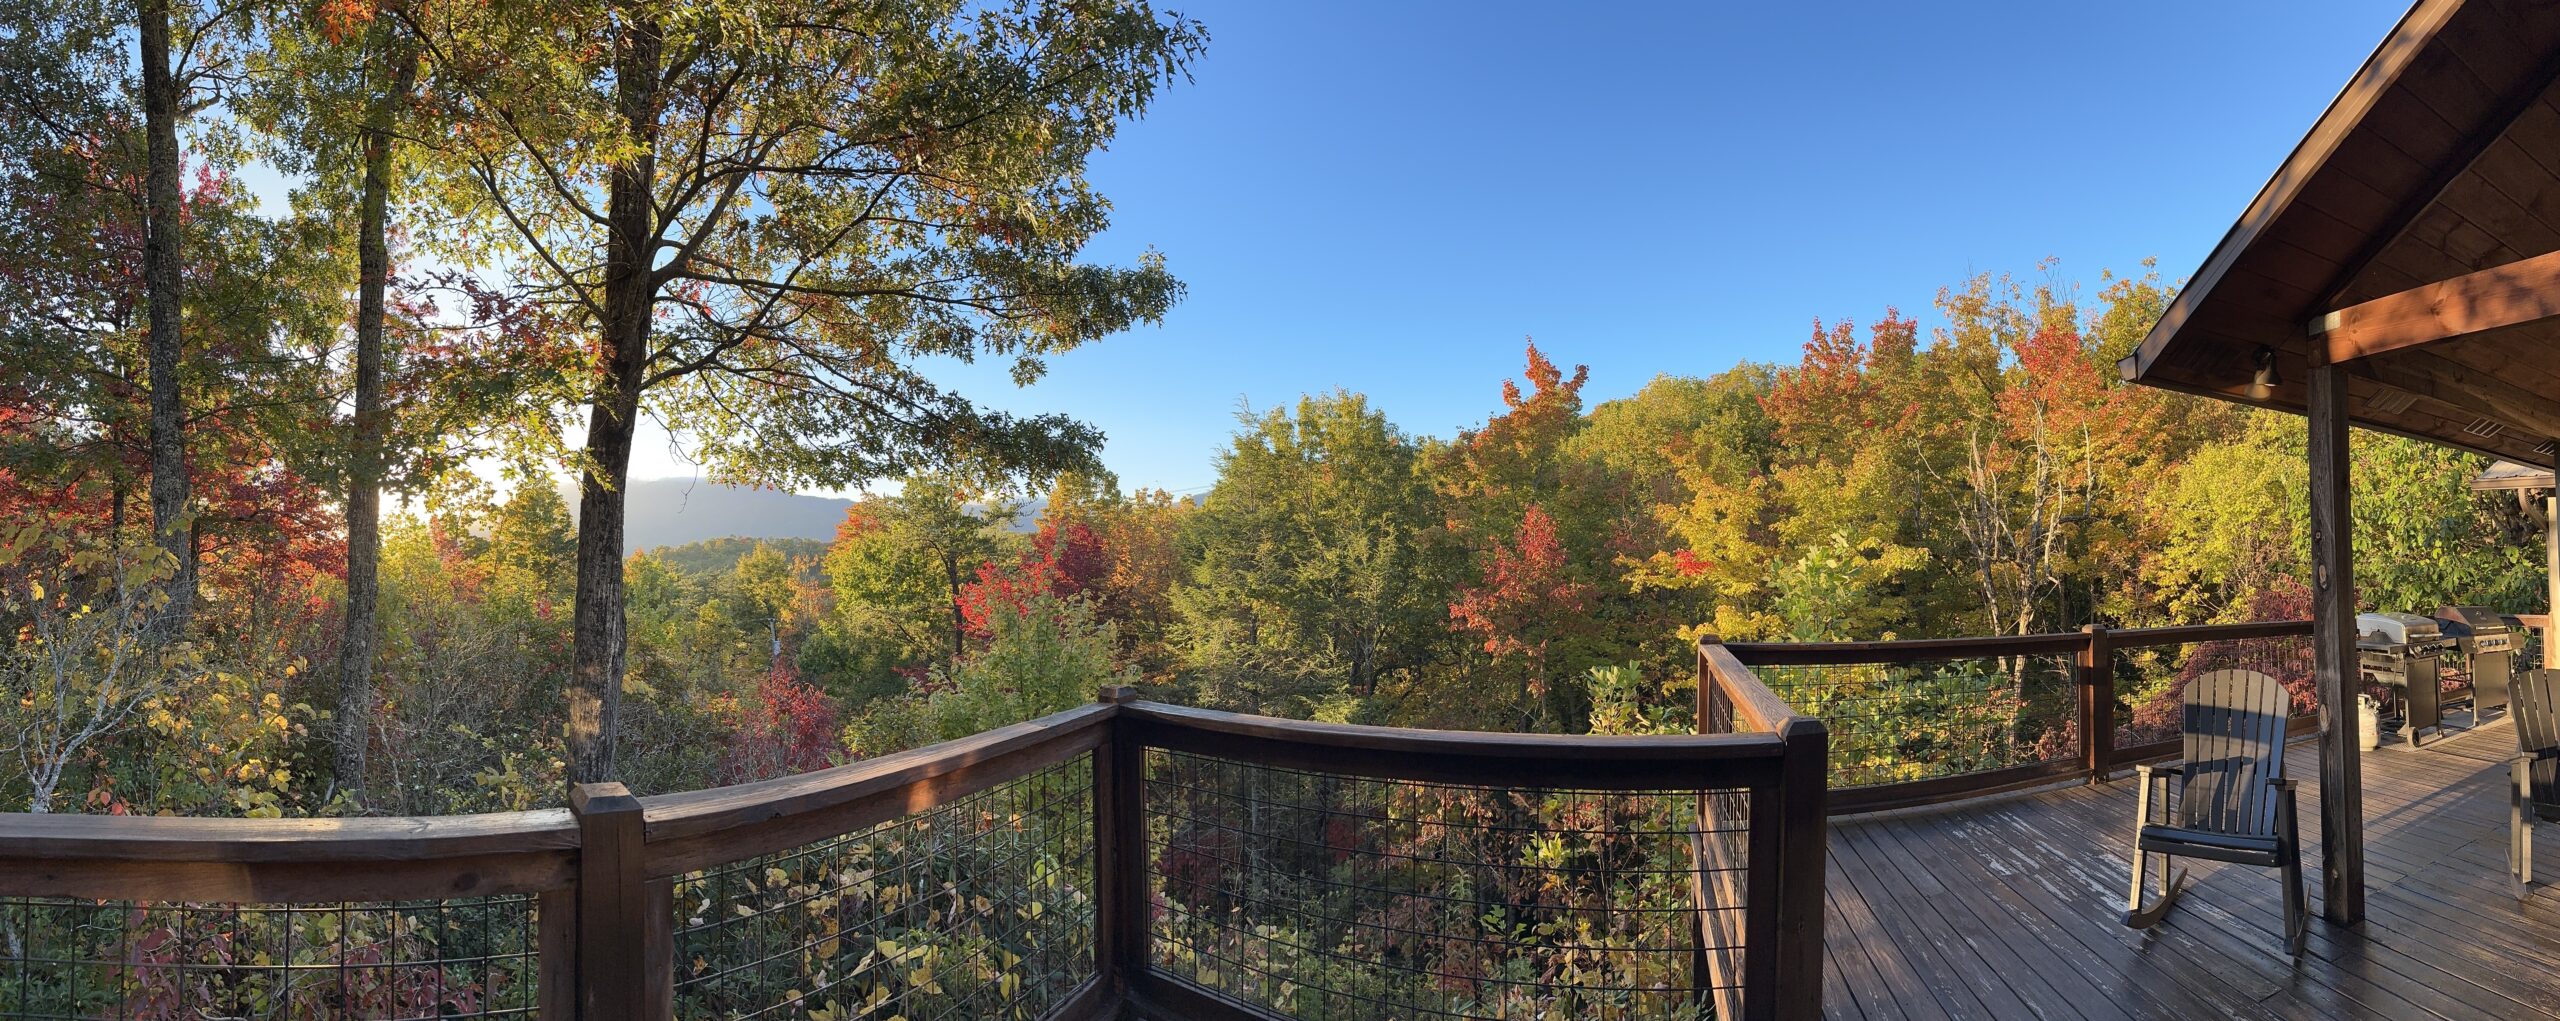 View of the forest from a lookout tower - Fall in the Great Smokies - Adventures in Good Company